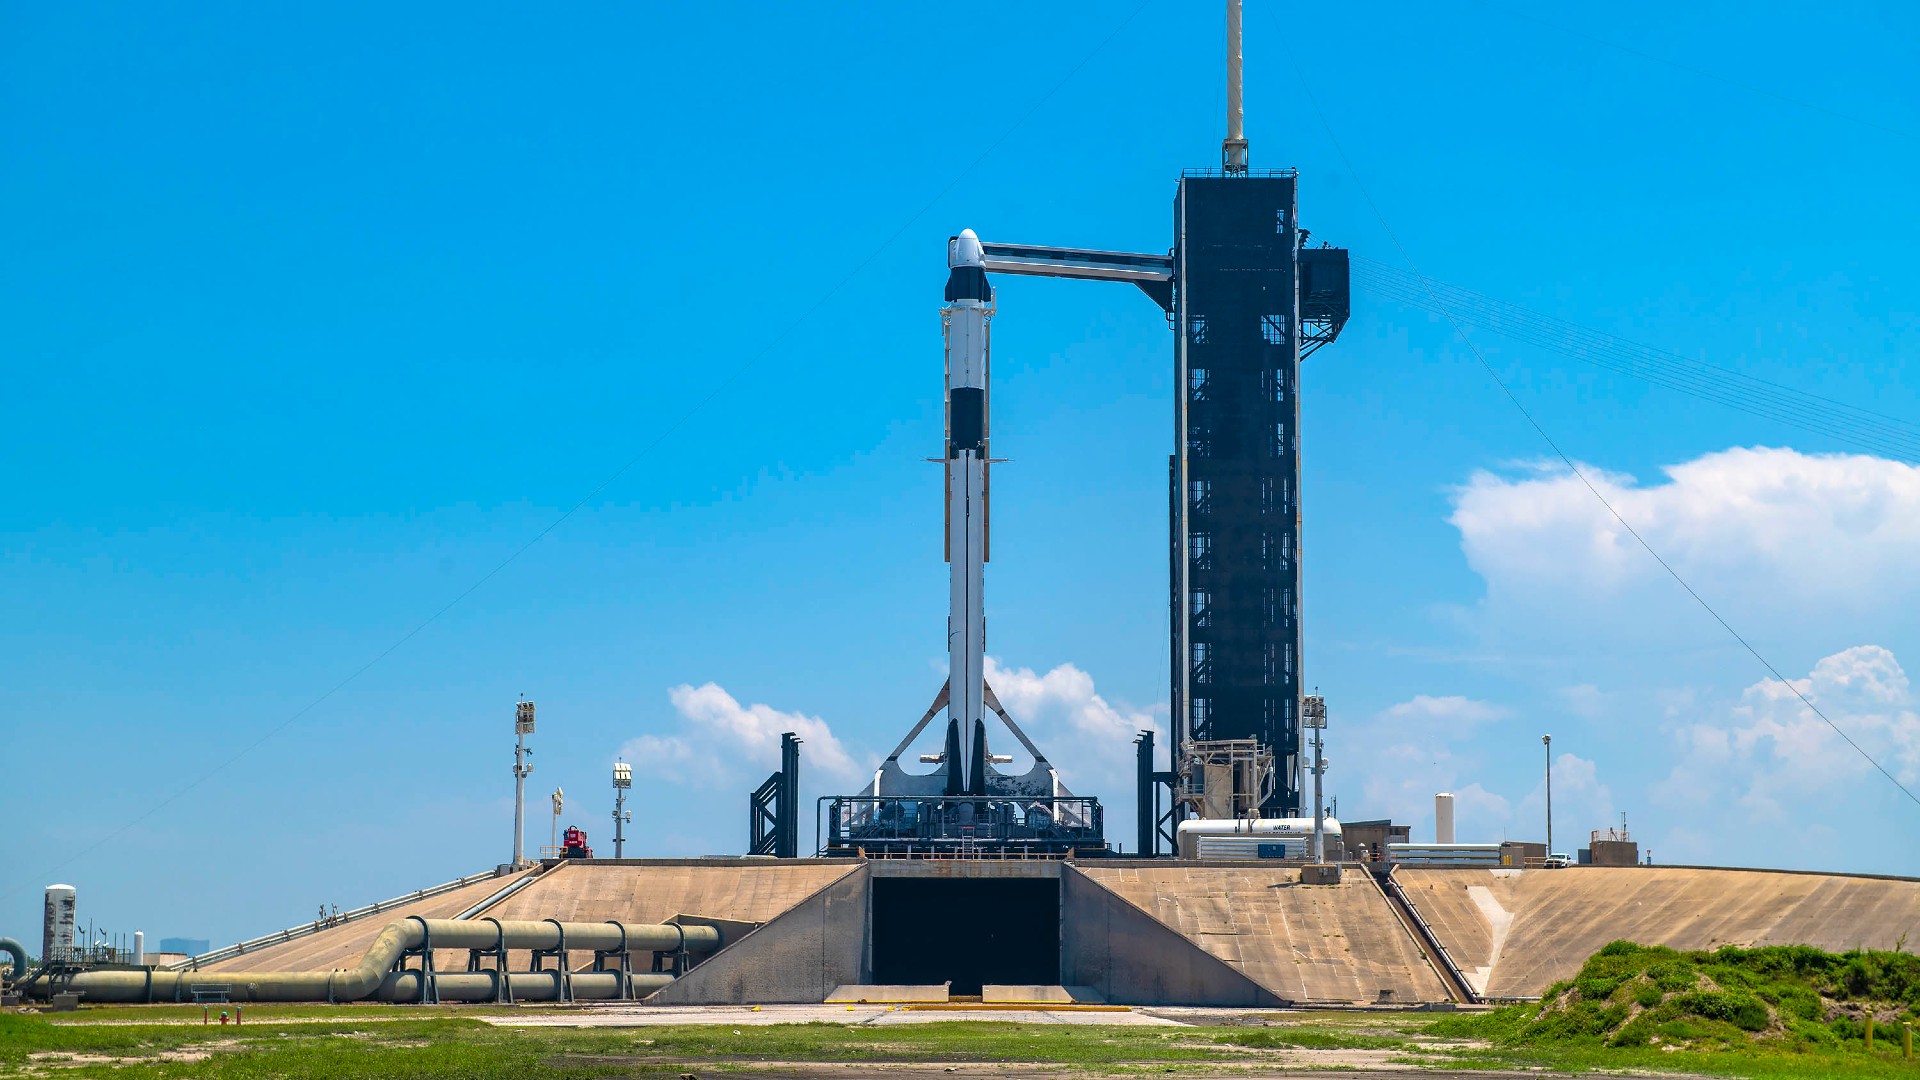 A white rocket on a launch pad under a blue sky